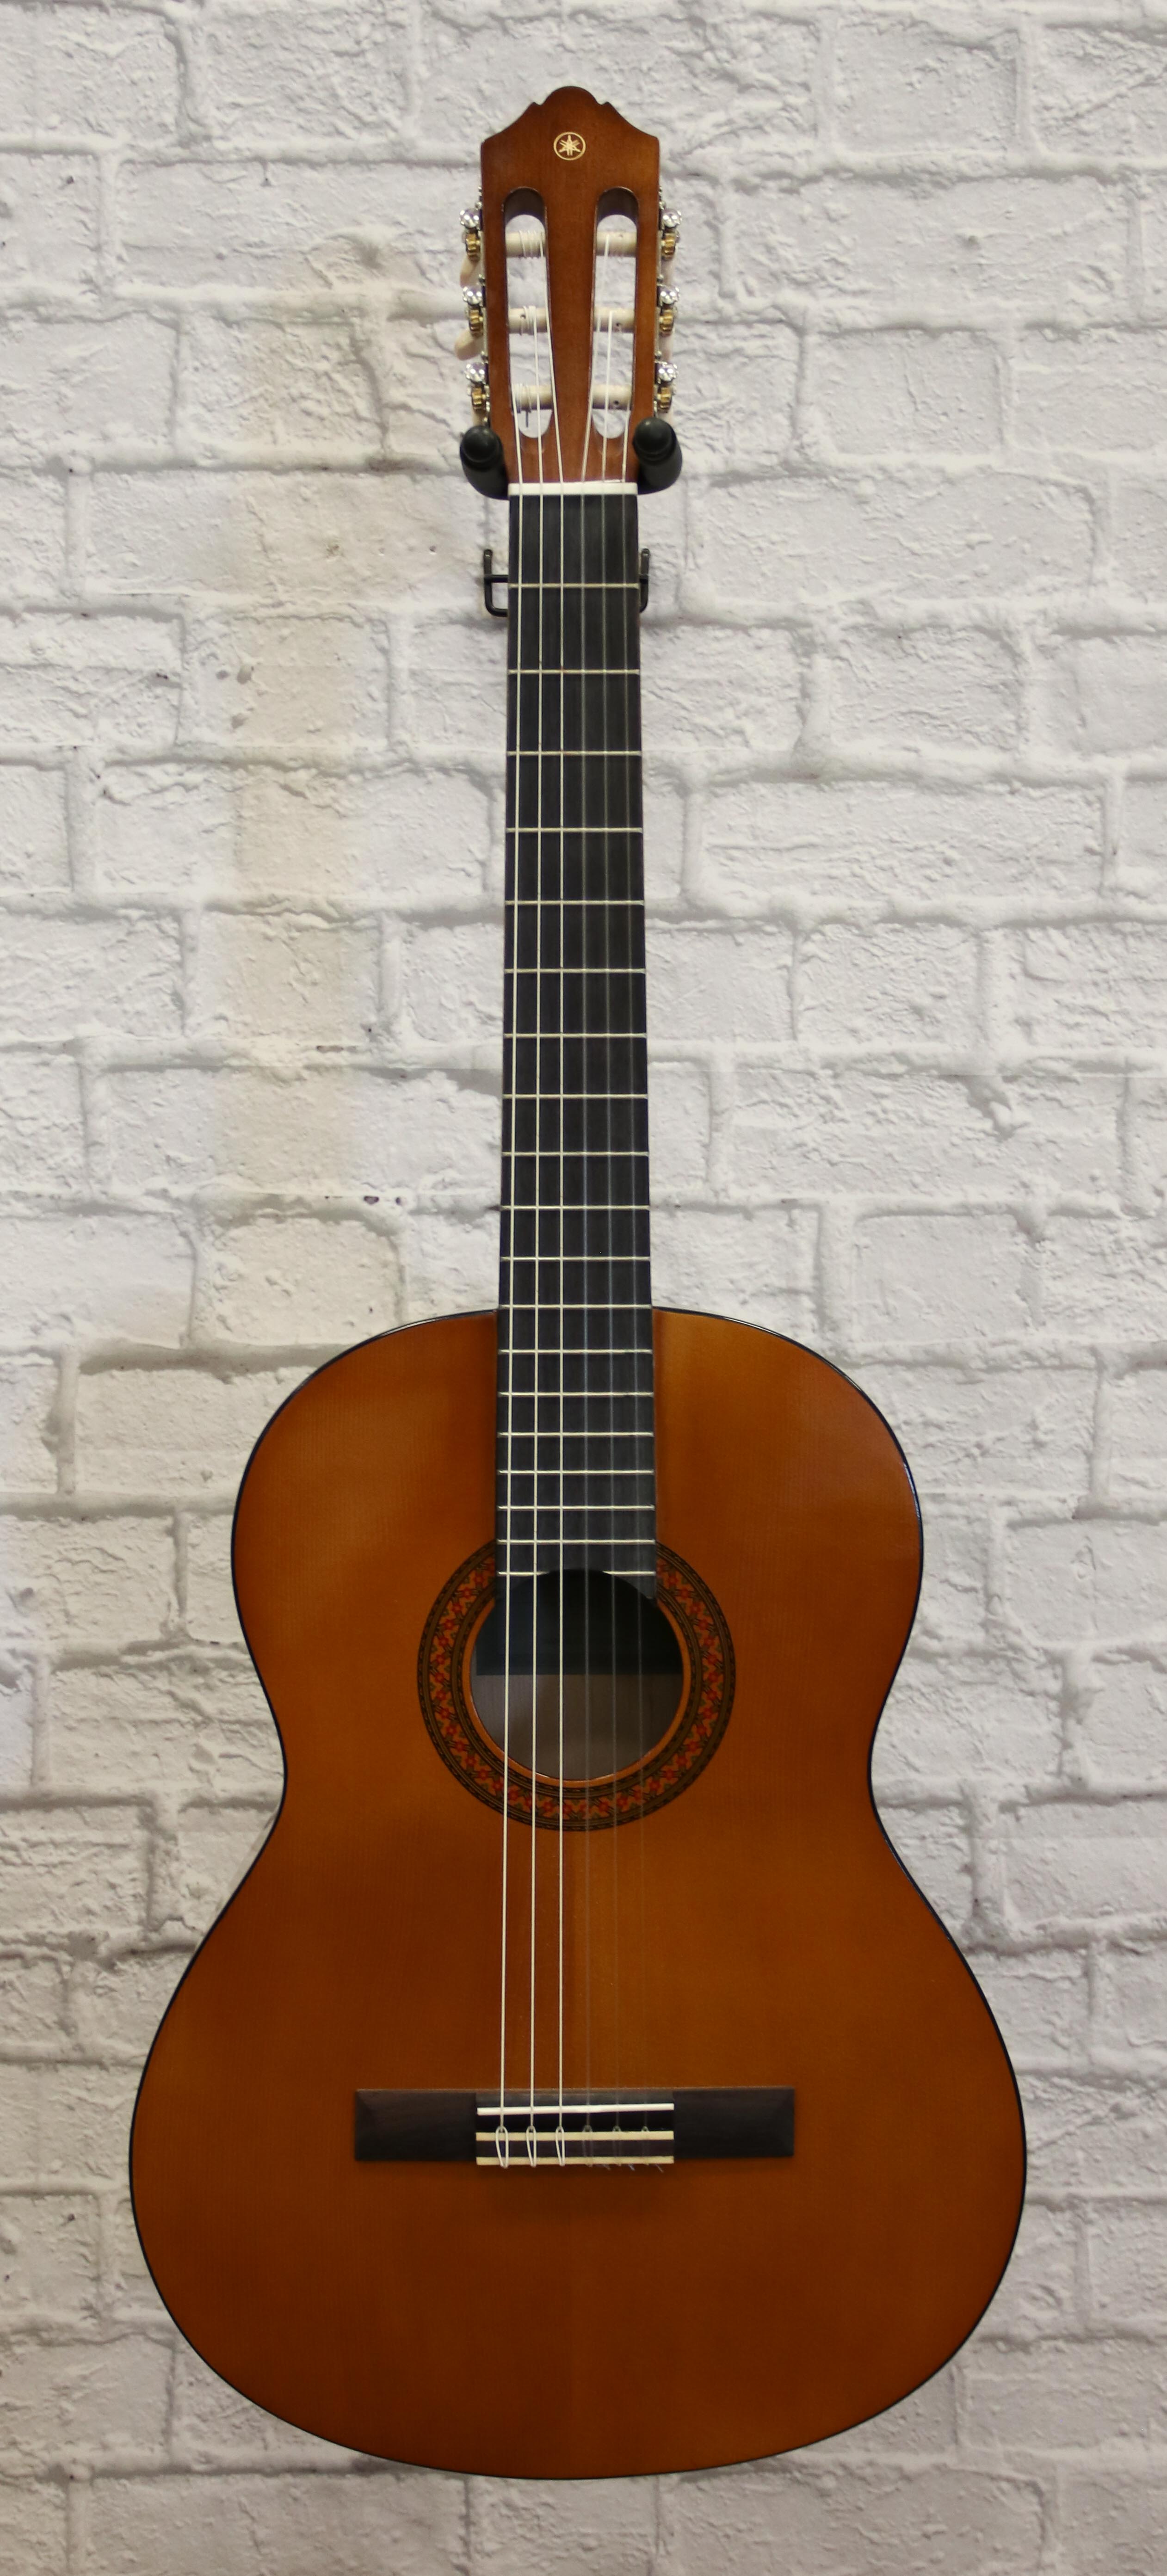 Yamaha C40 Classical Guitar Deep Scratches And Smudges 86792958514 Ebay